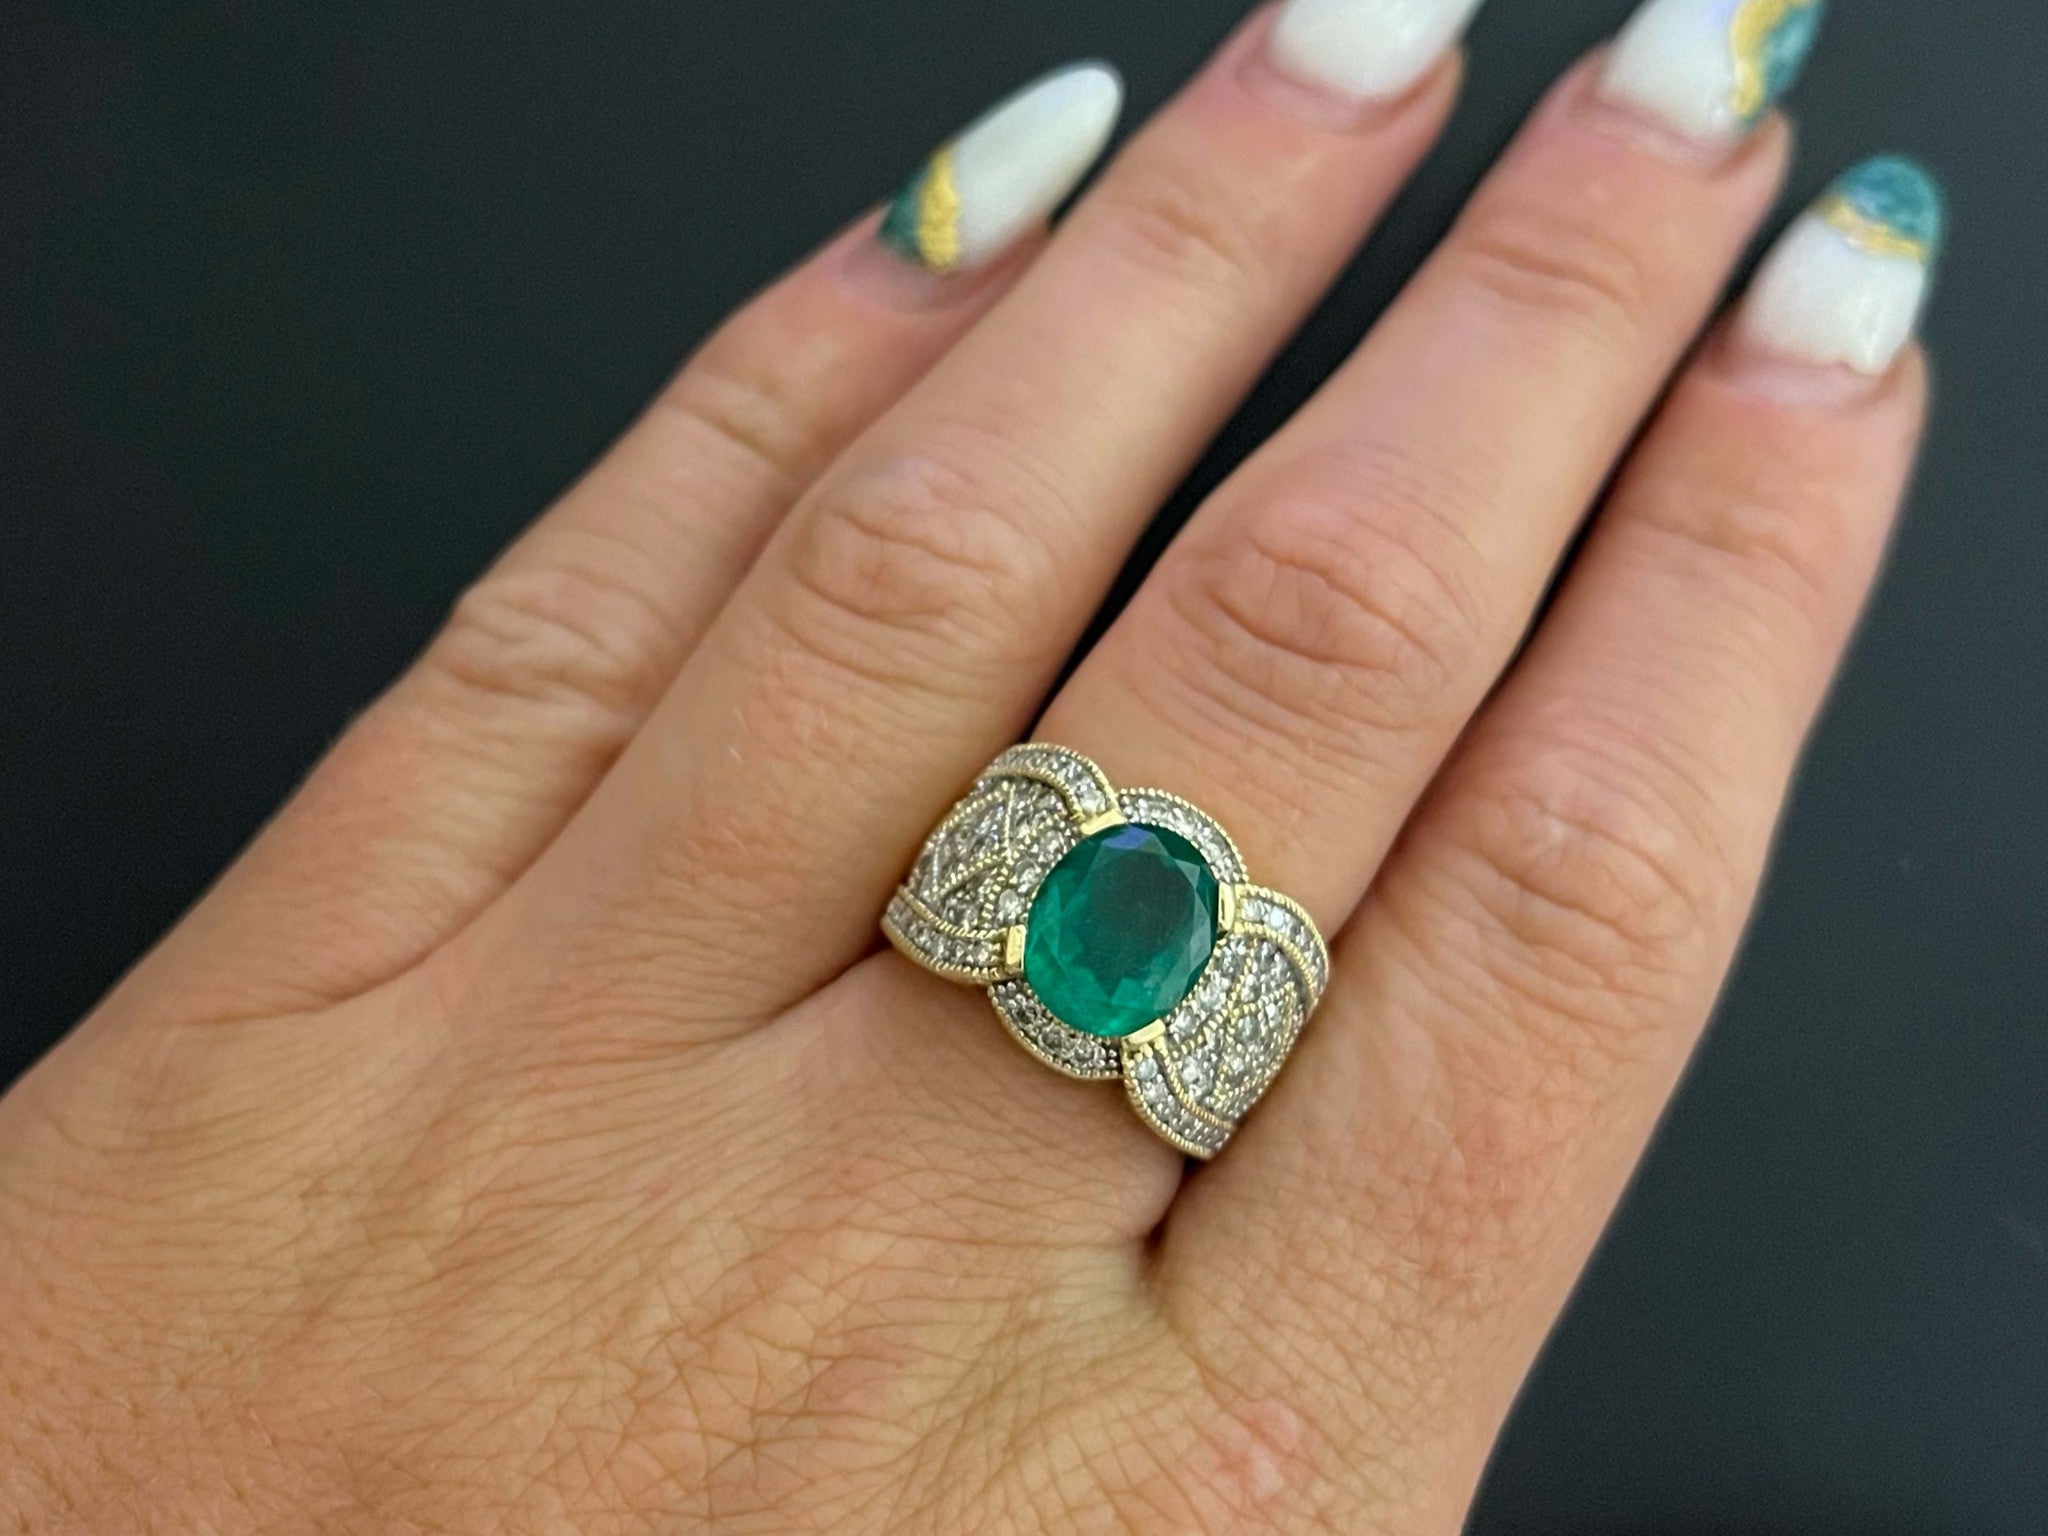 GIA Rare 2.65 ct. Colombian Emerald & Diamond Cigar Band Ring in 14k Yellow Gold